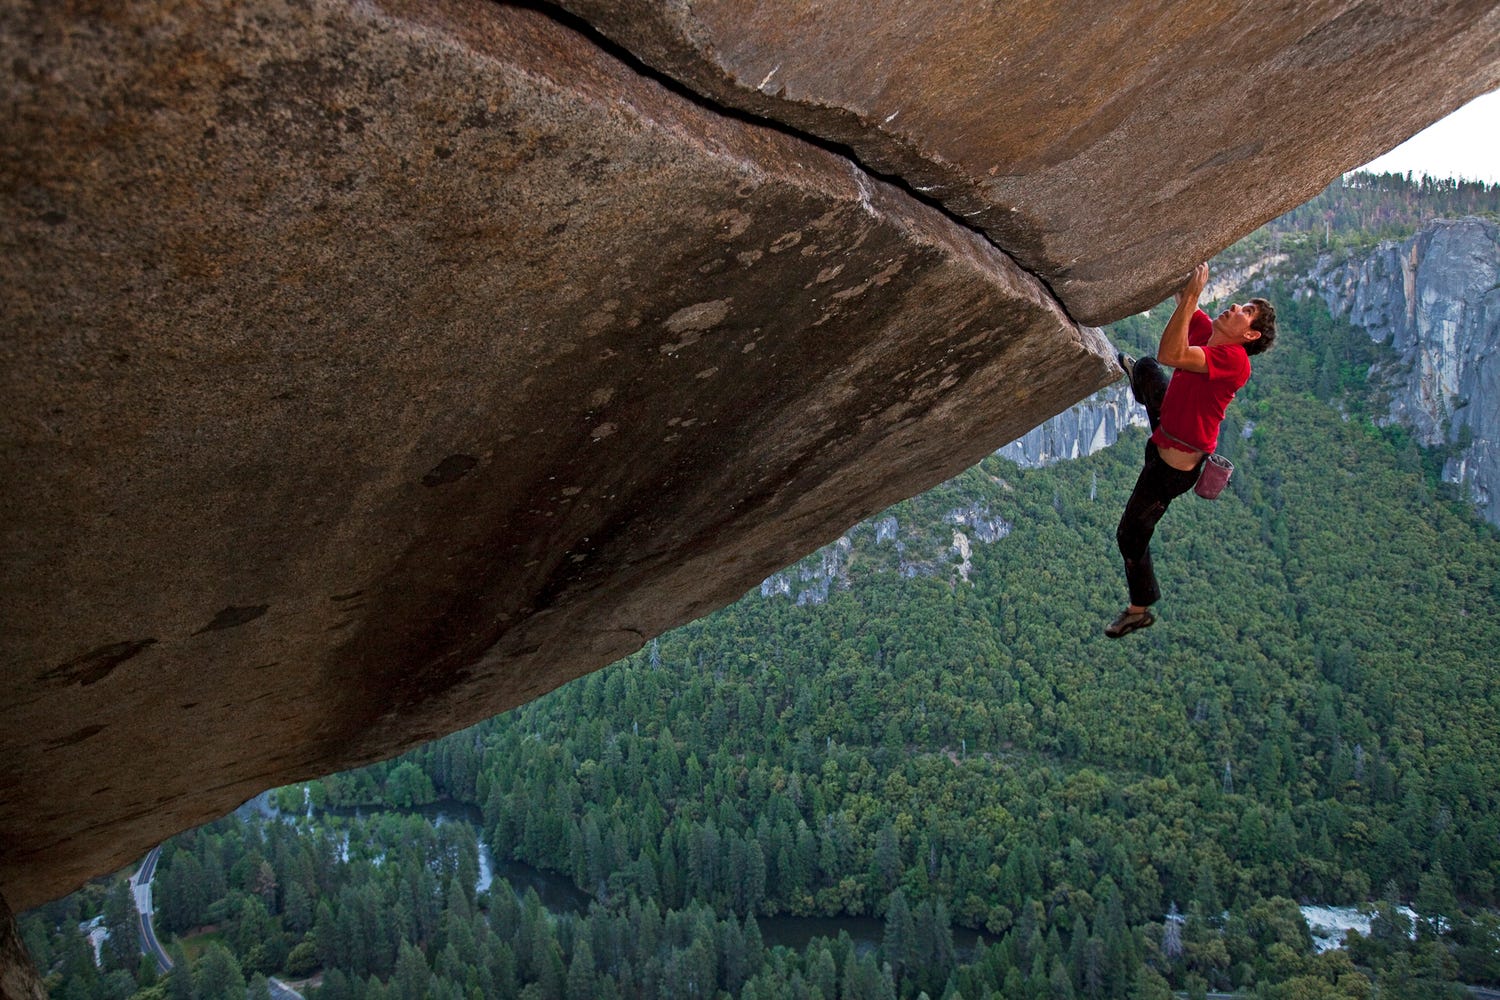 Impact in the 21st Century, Episode 1: Alex Honnold, by Simbi Foundation